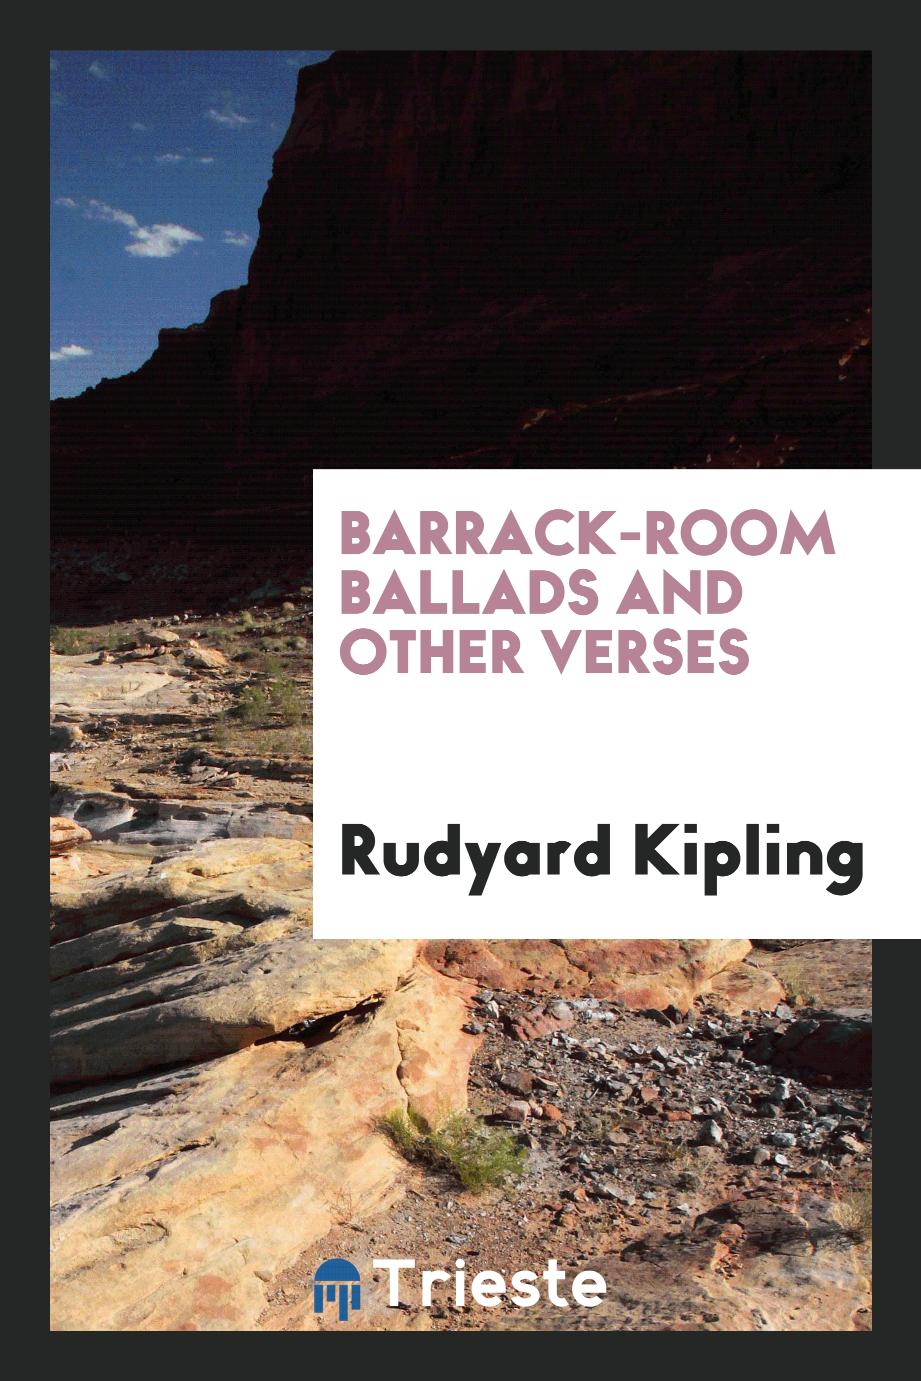 Barrack-room ballads and other verses